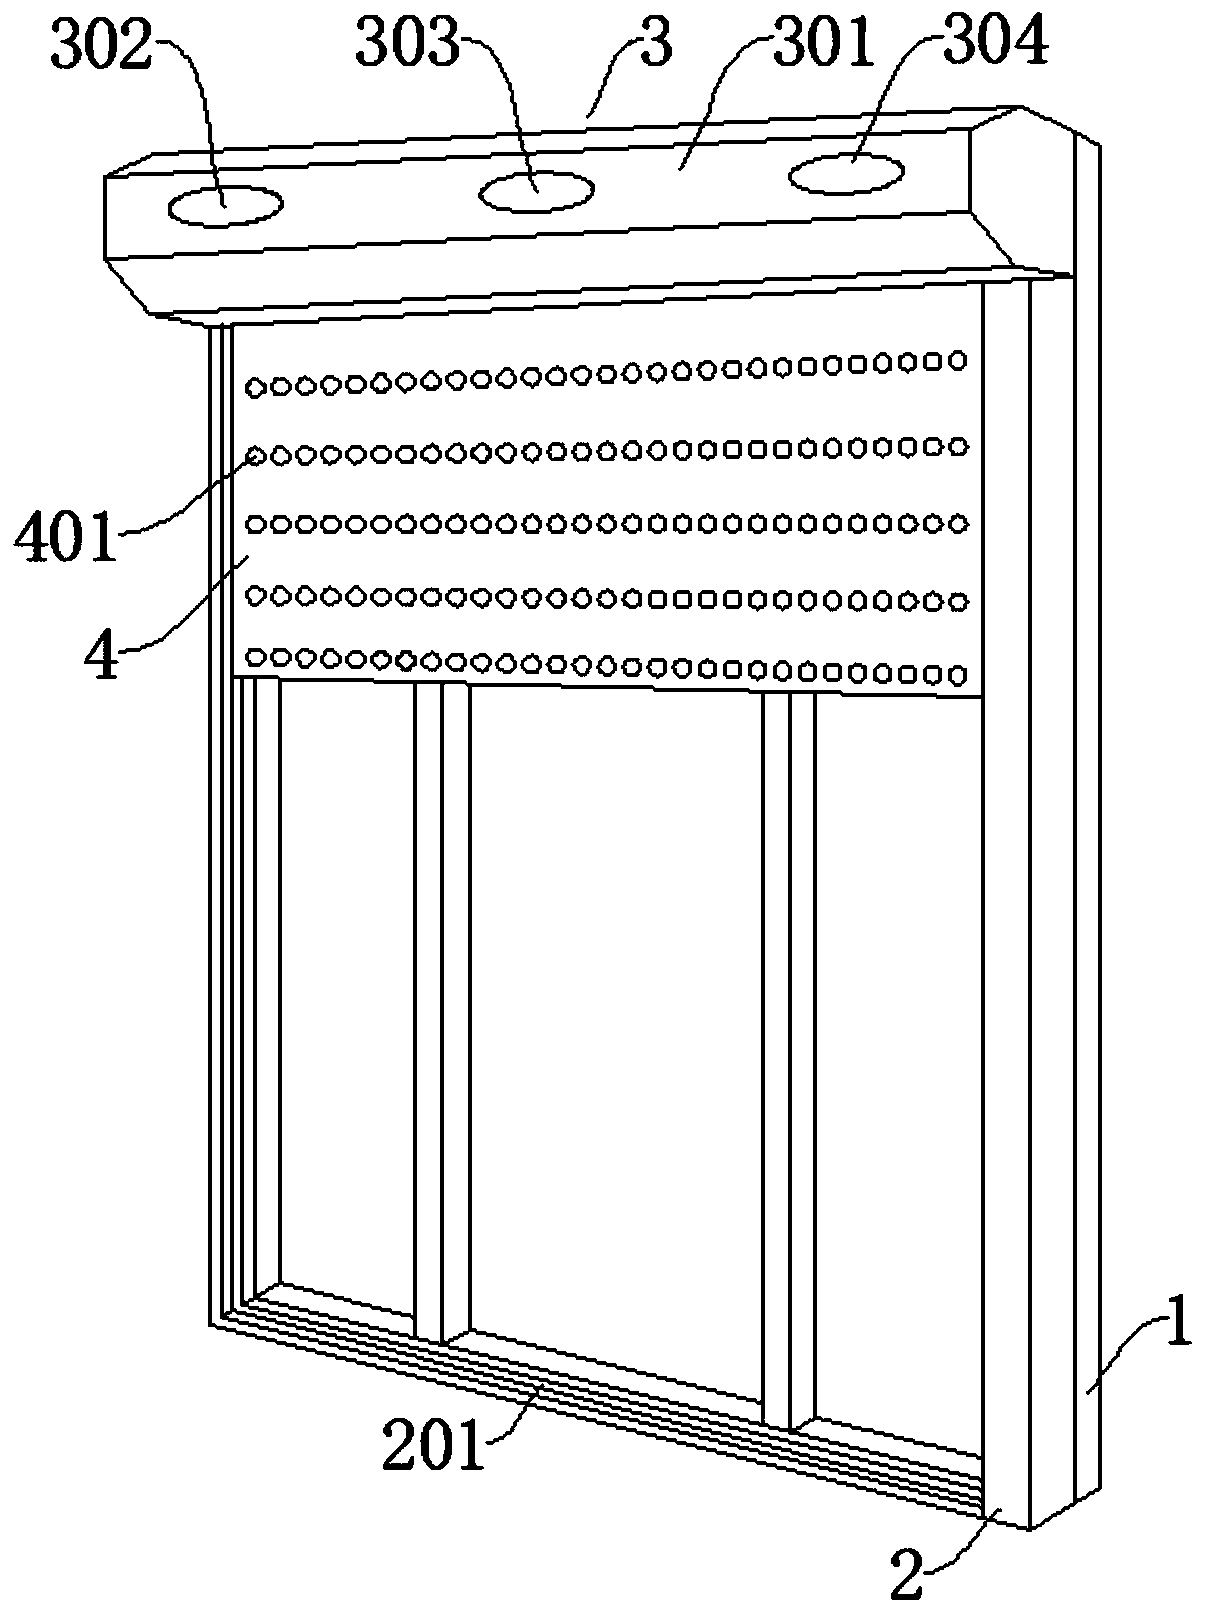 Self-induction type intelligent electric shutter